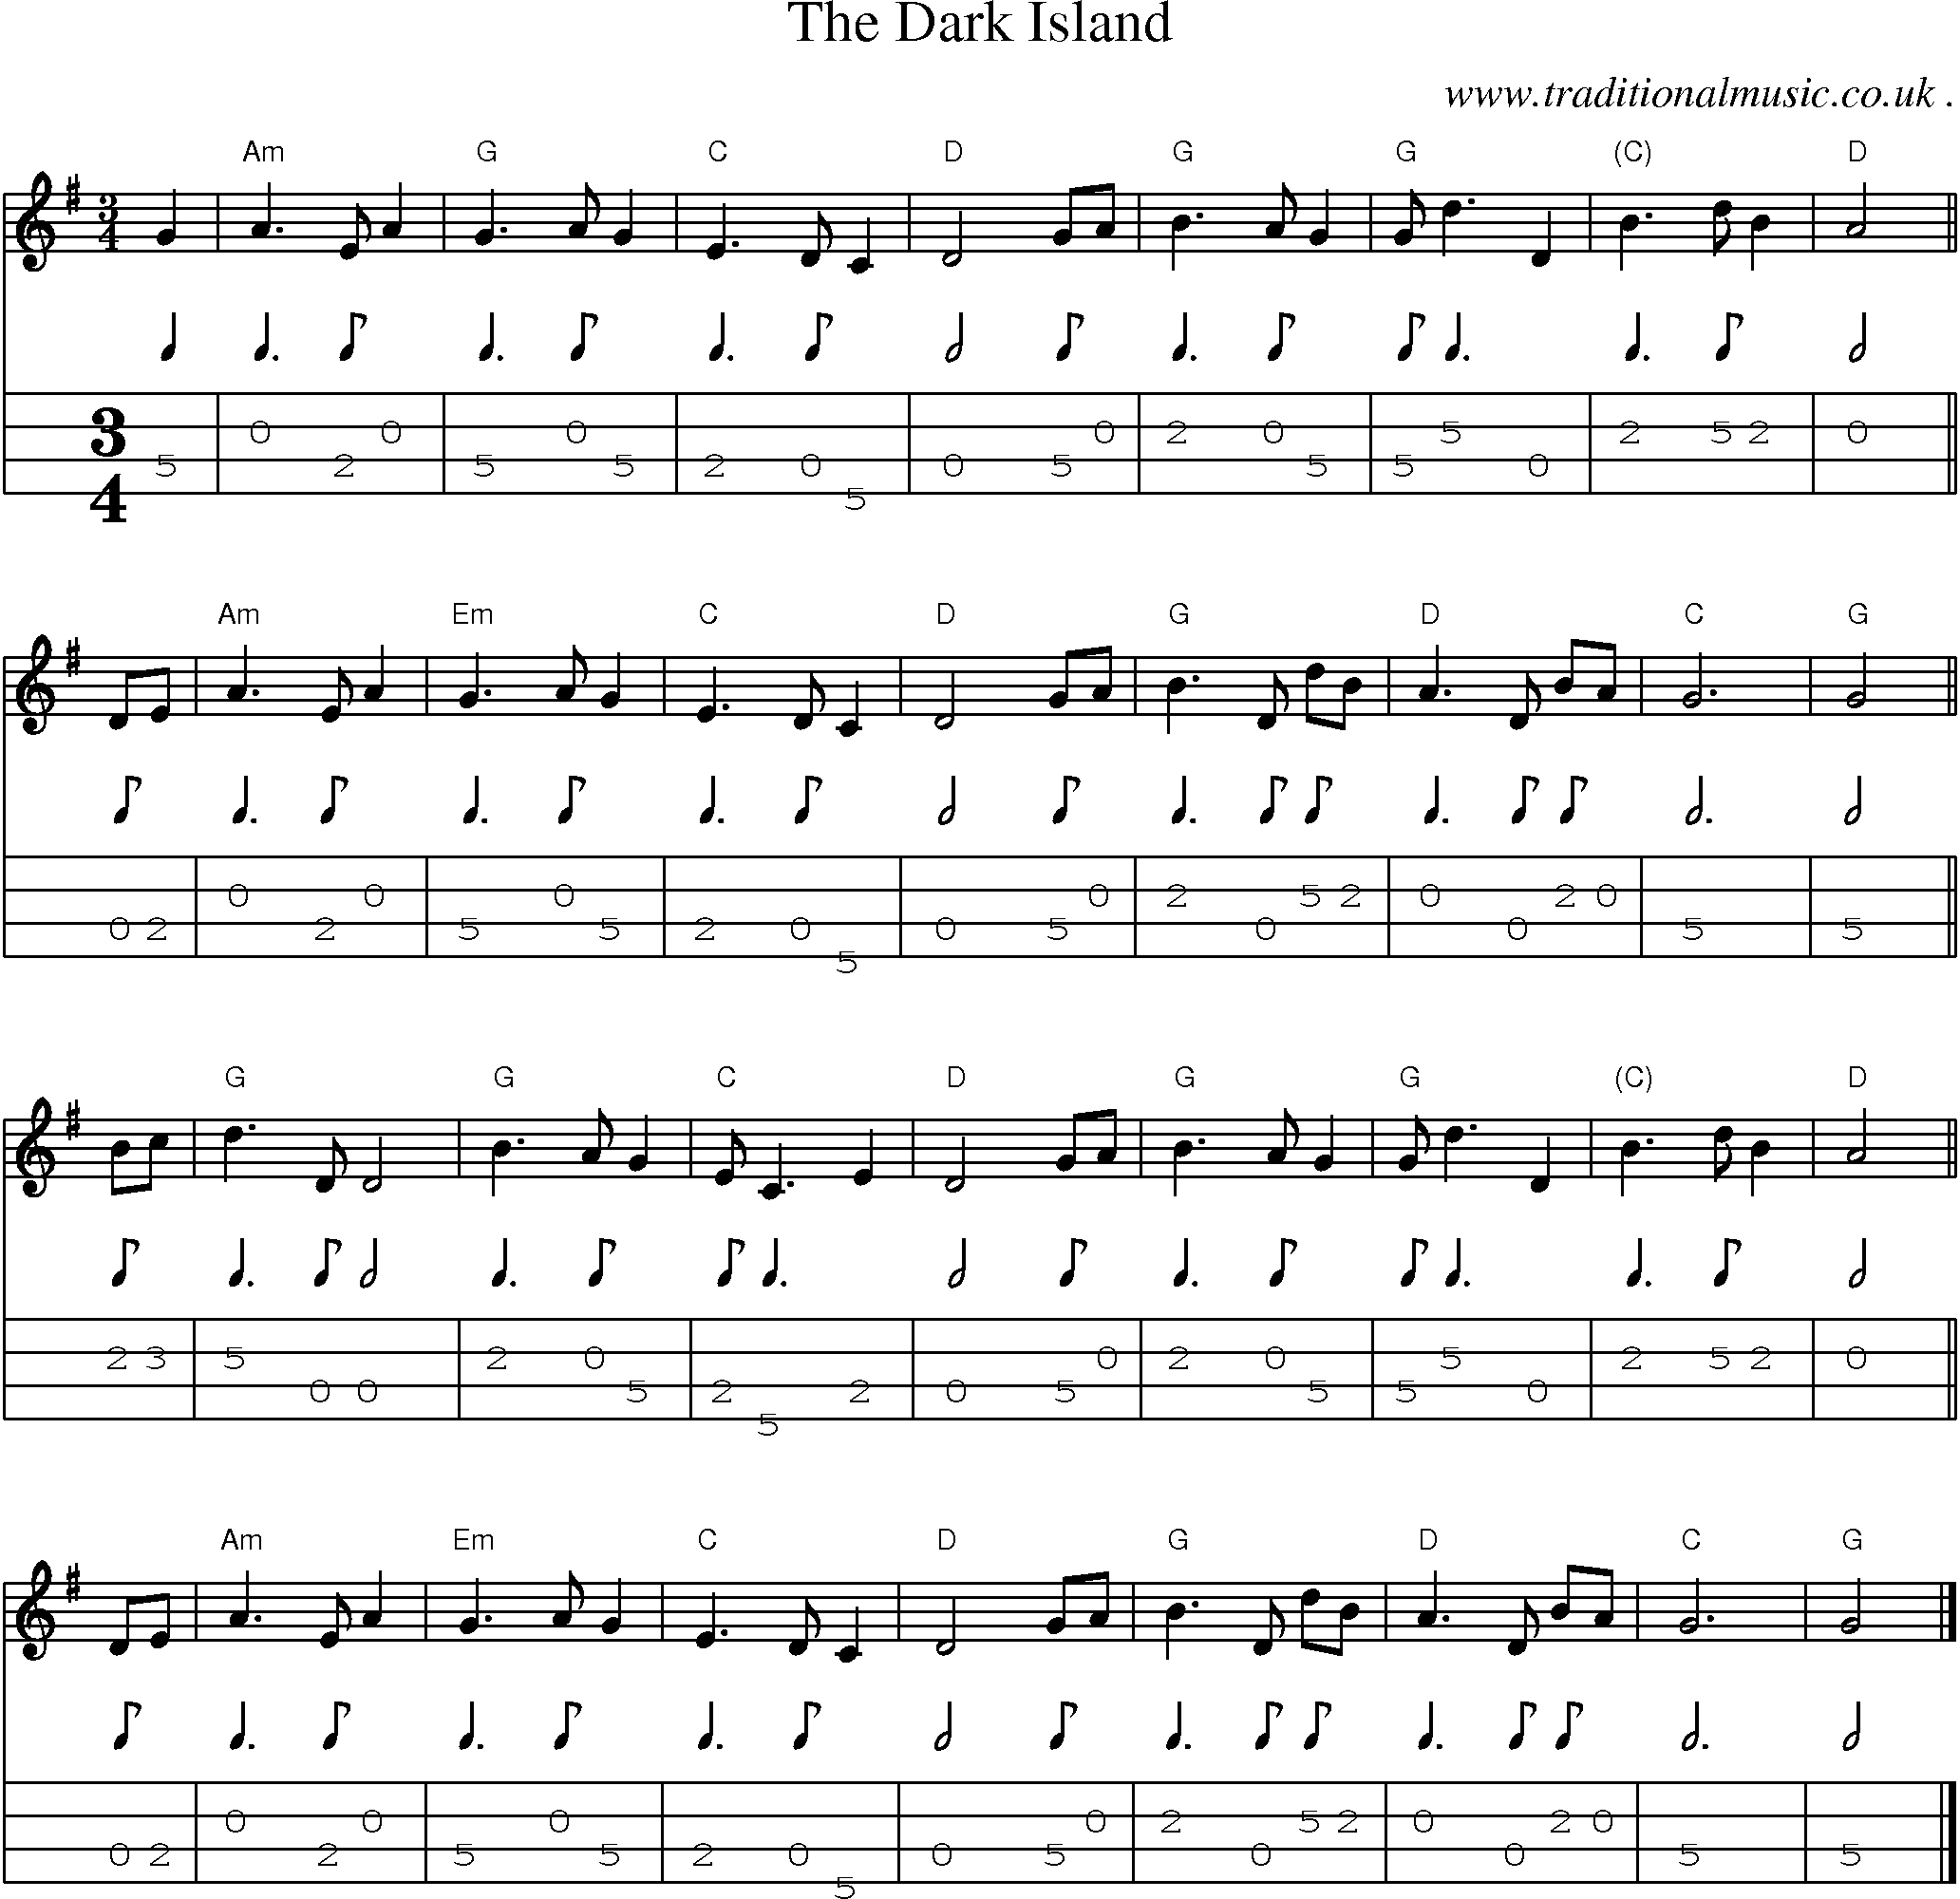 Sheet-music  score, Chords and Mandolin Tabs for The Dark Island